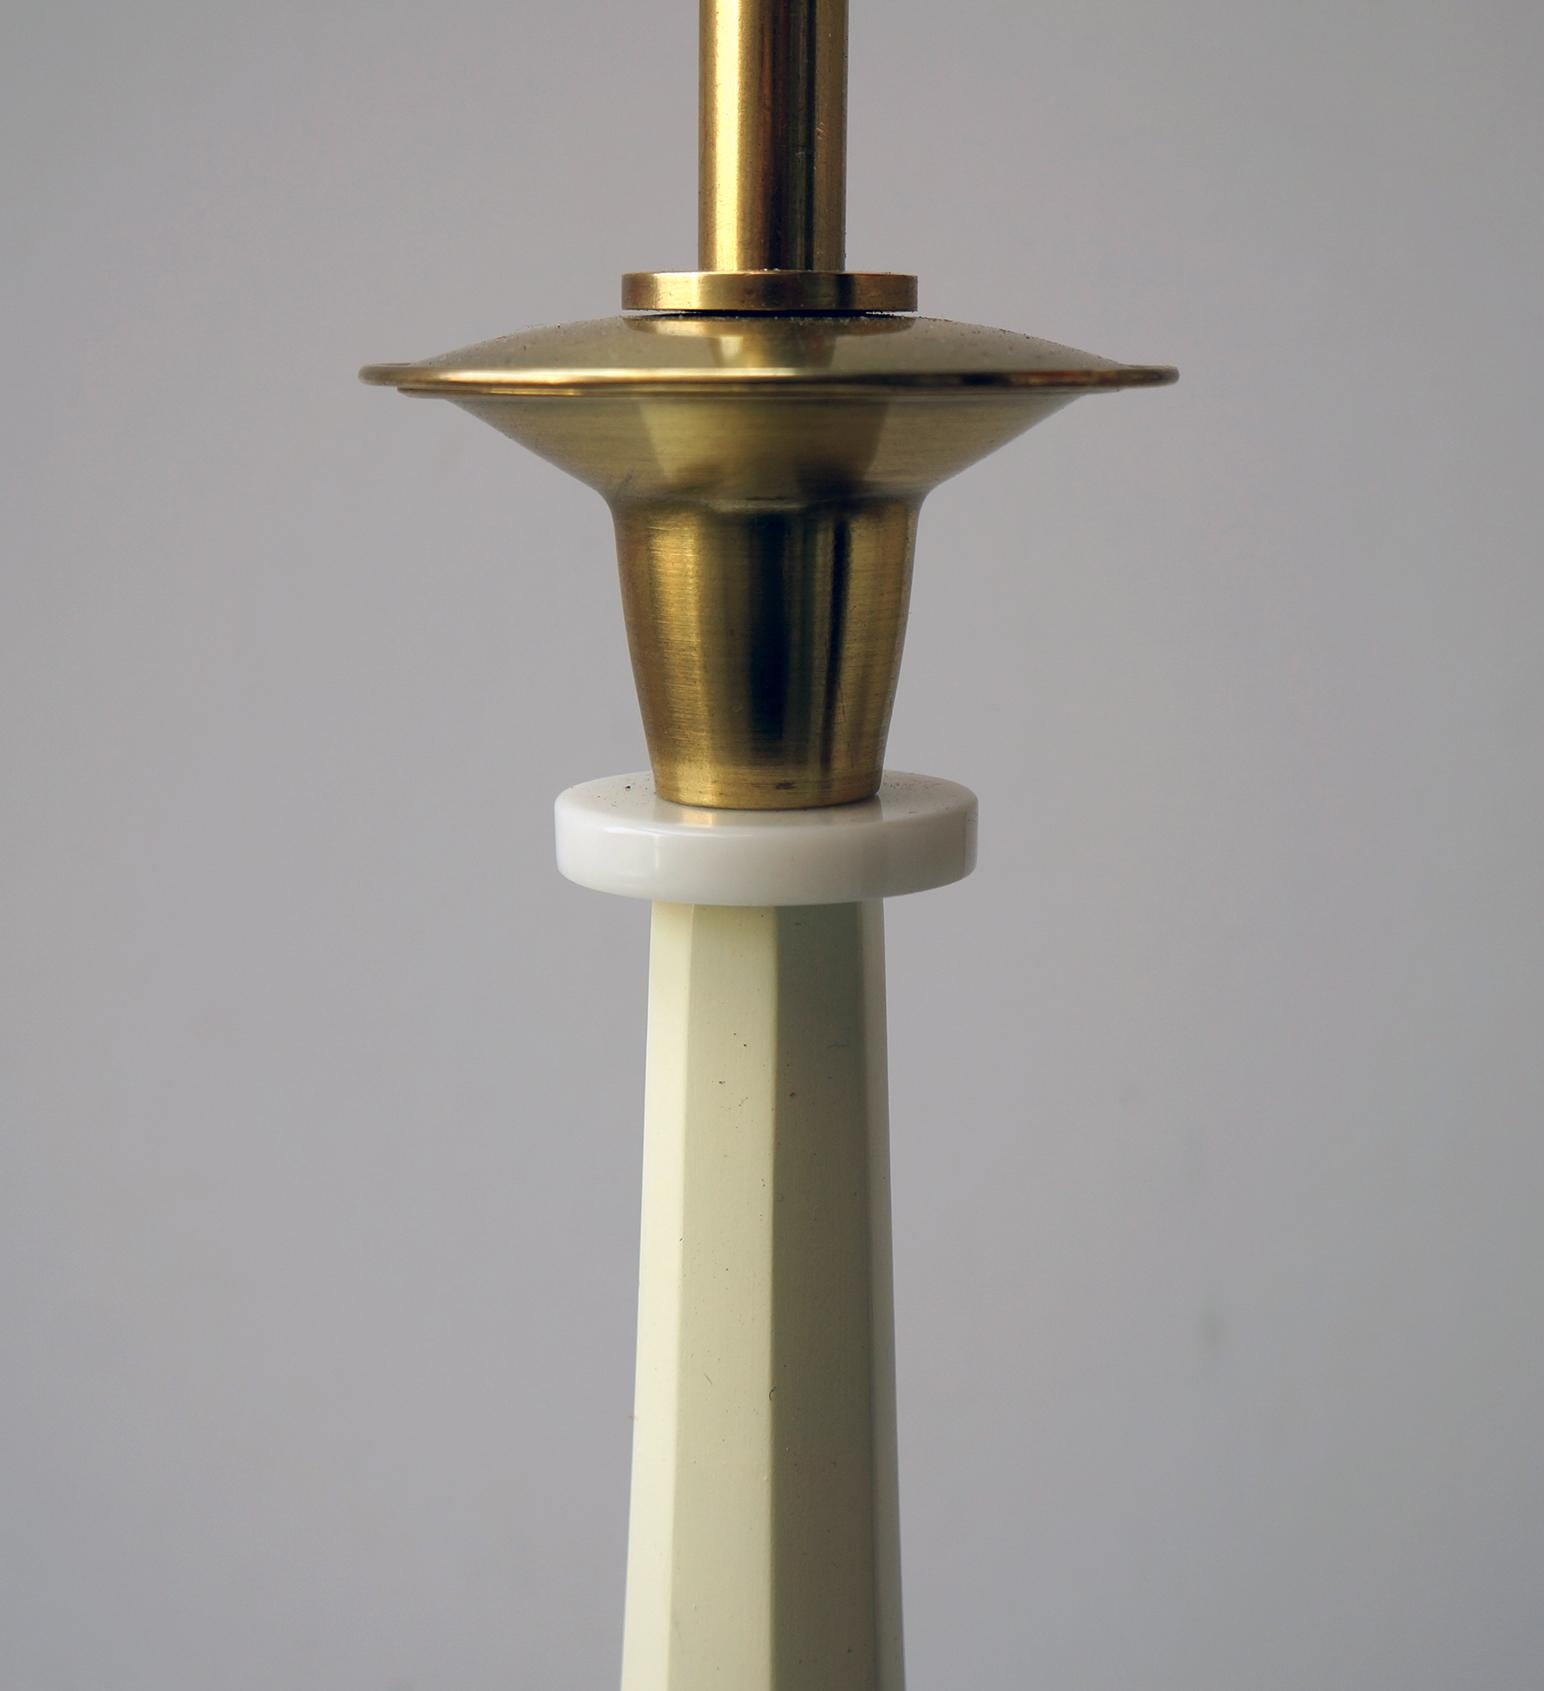 20th Century Table Lamp Mid-Century Modern Architectural Wood and Brass, 1950s